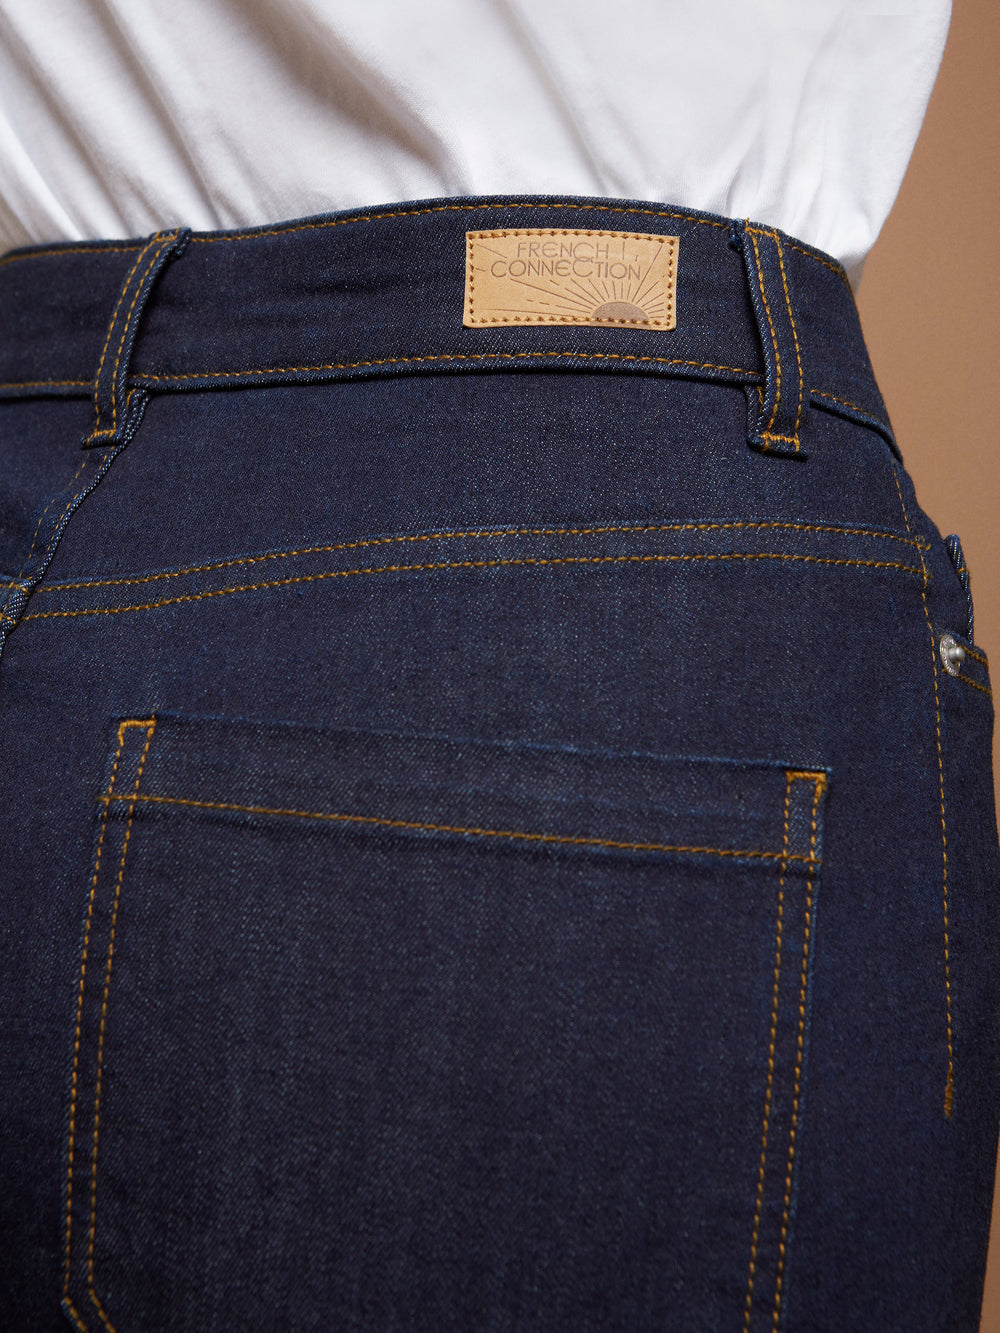 Indigo French Clean Connection | US Wide Stretch Denim Jeans